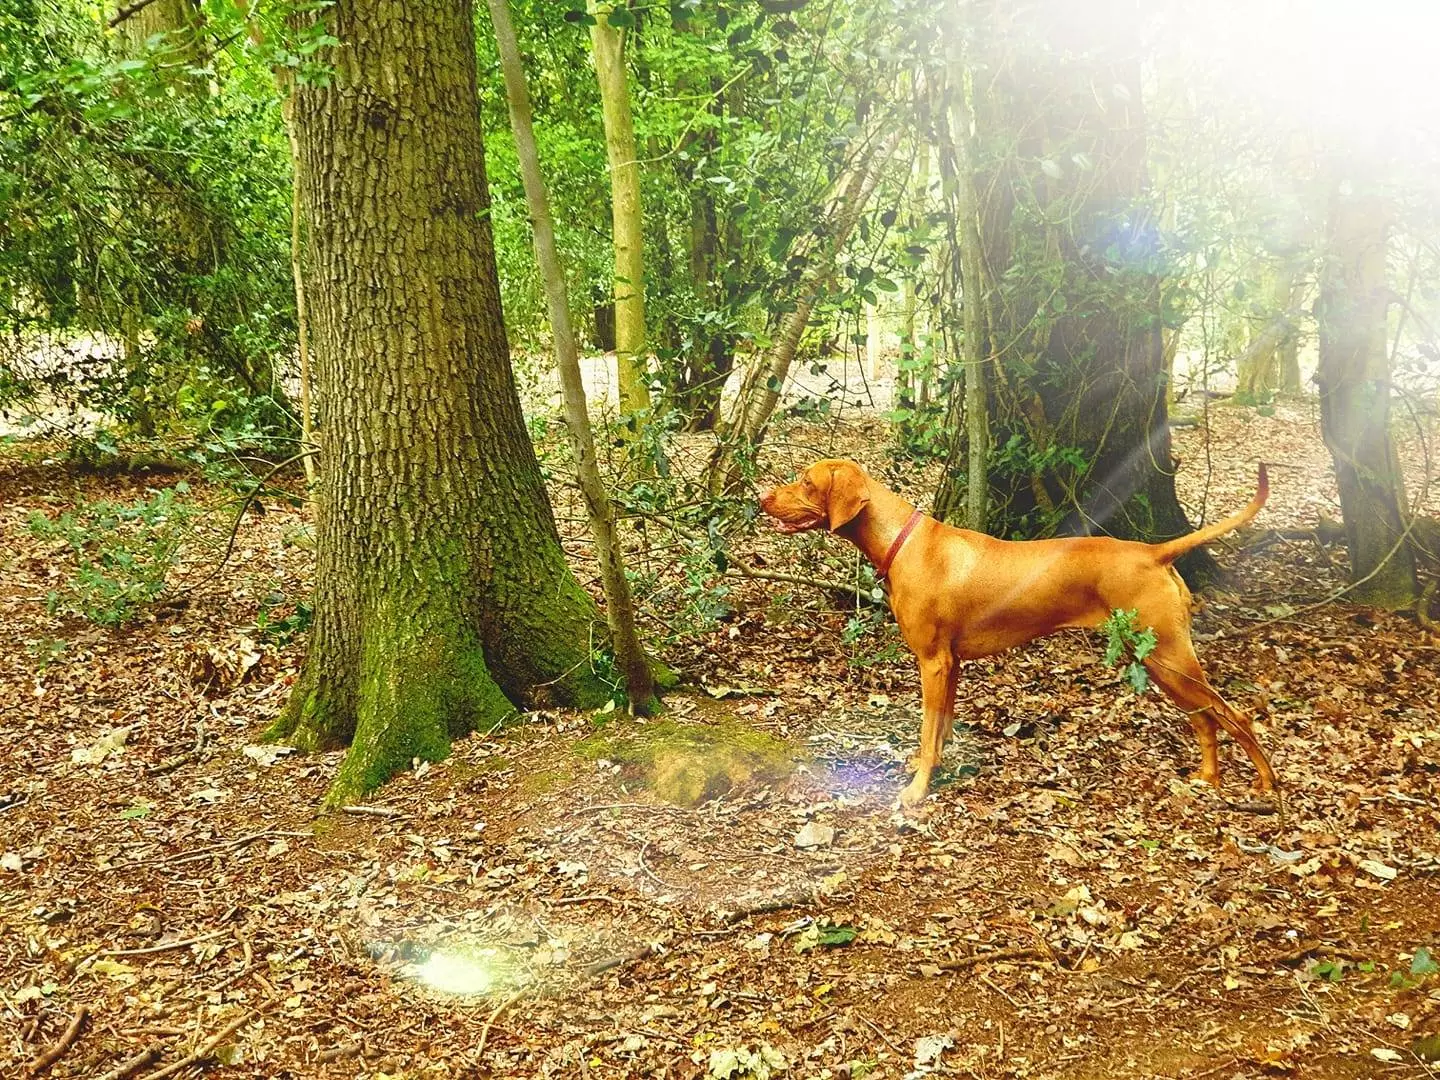 Mali in the woods.